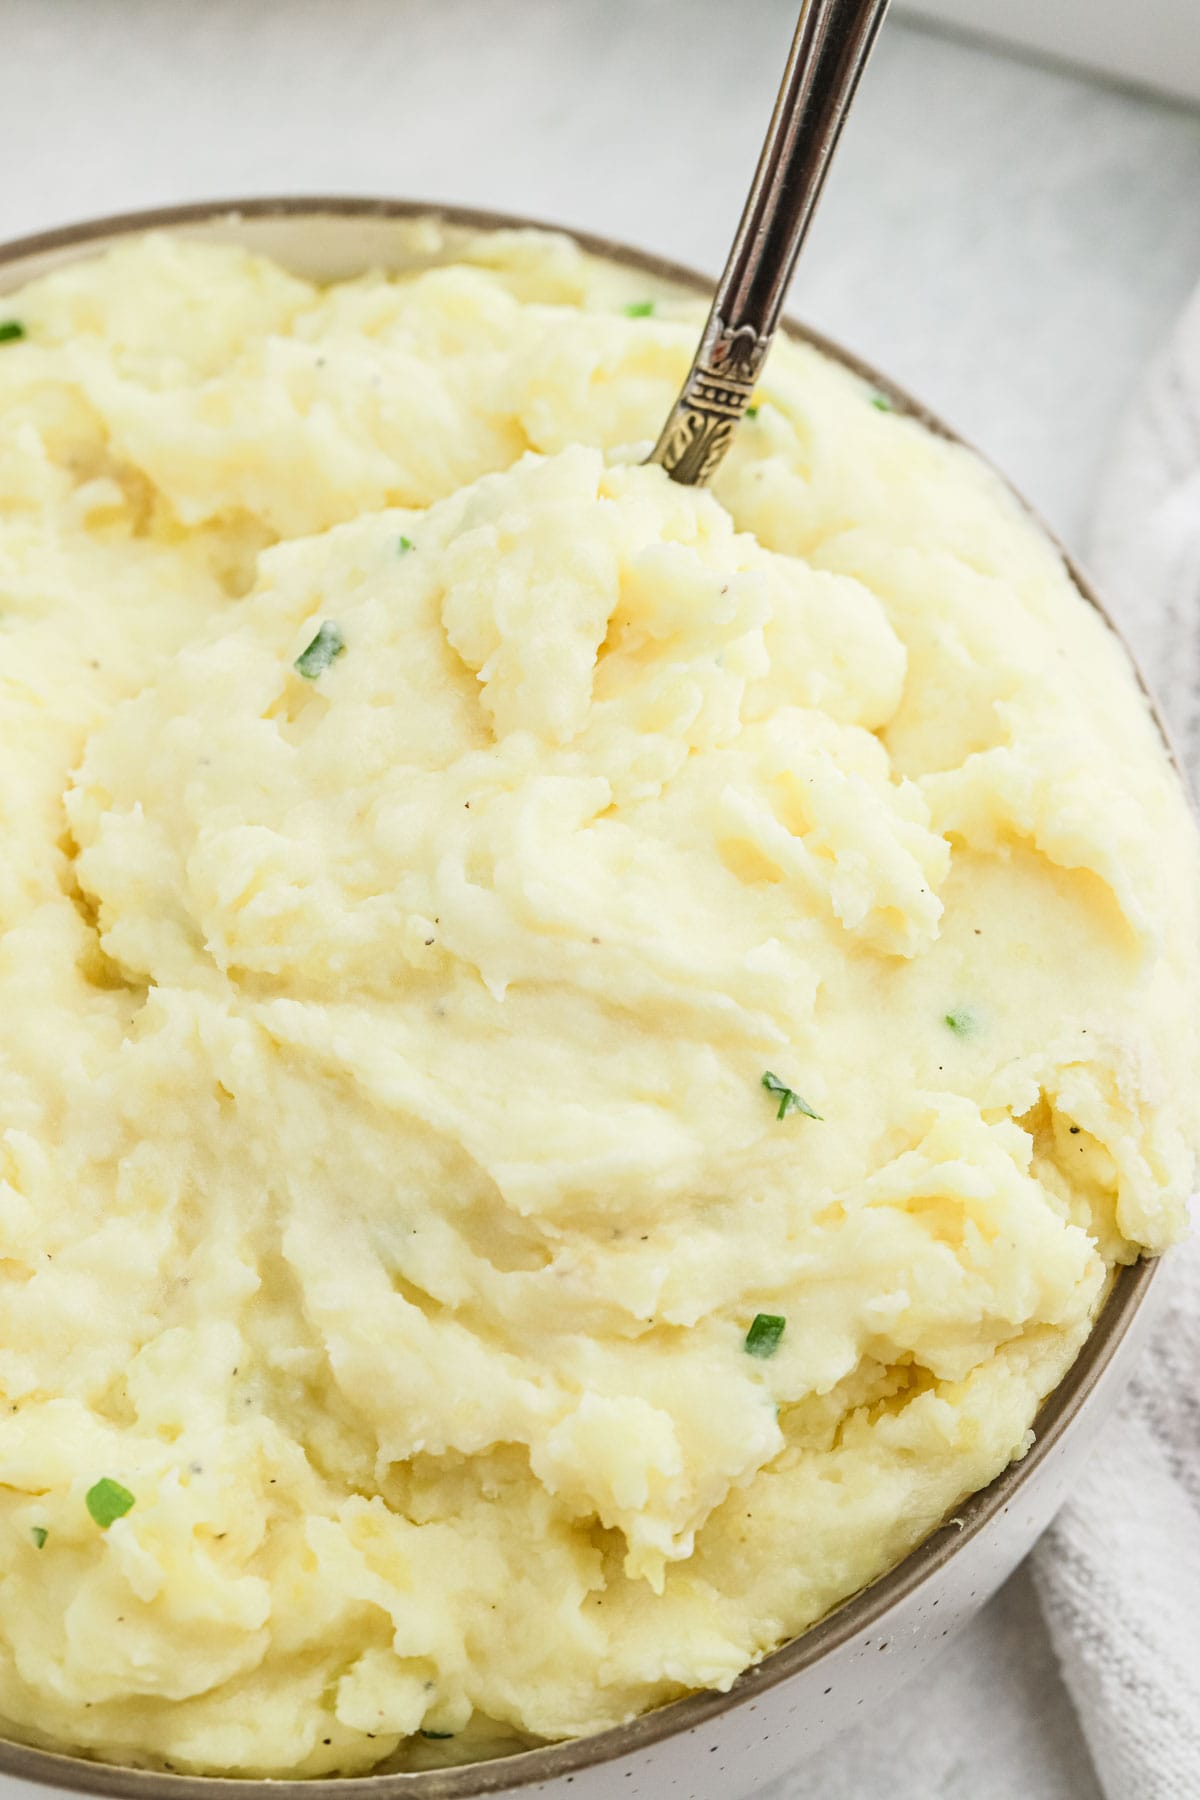 A silver spoon in a bowl of Cream Cheese Mashed Potatoes with chives